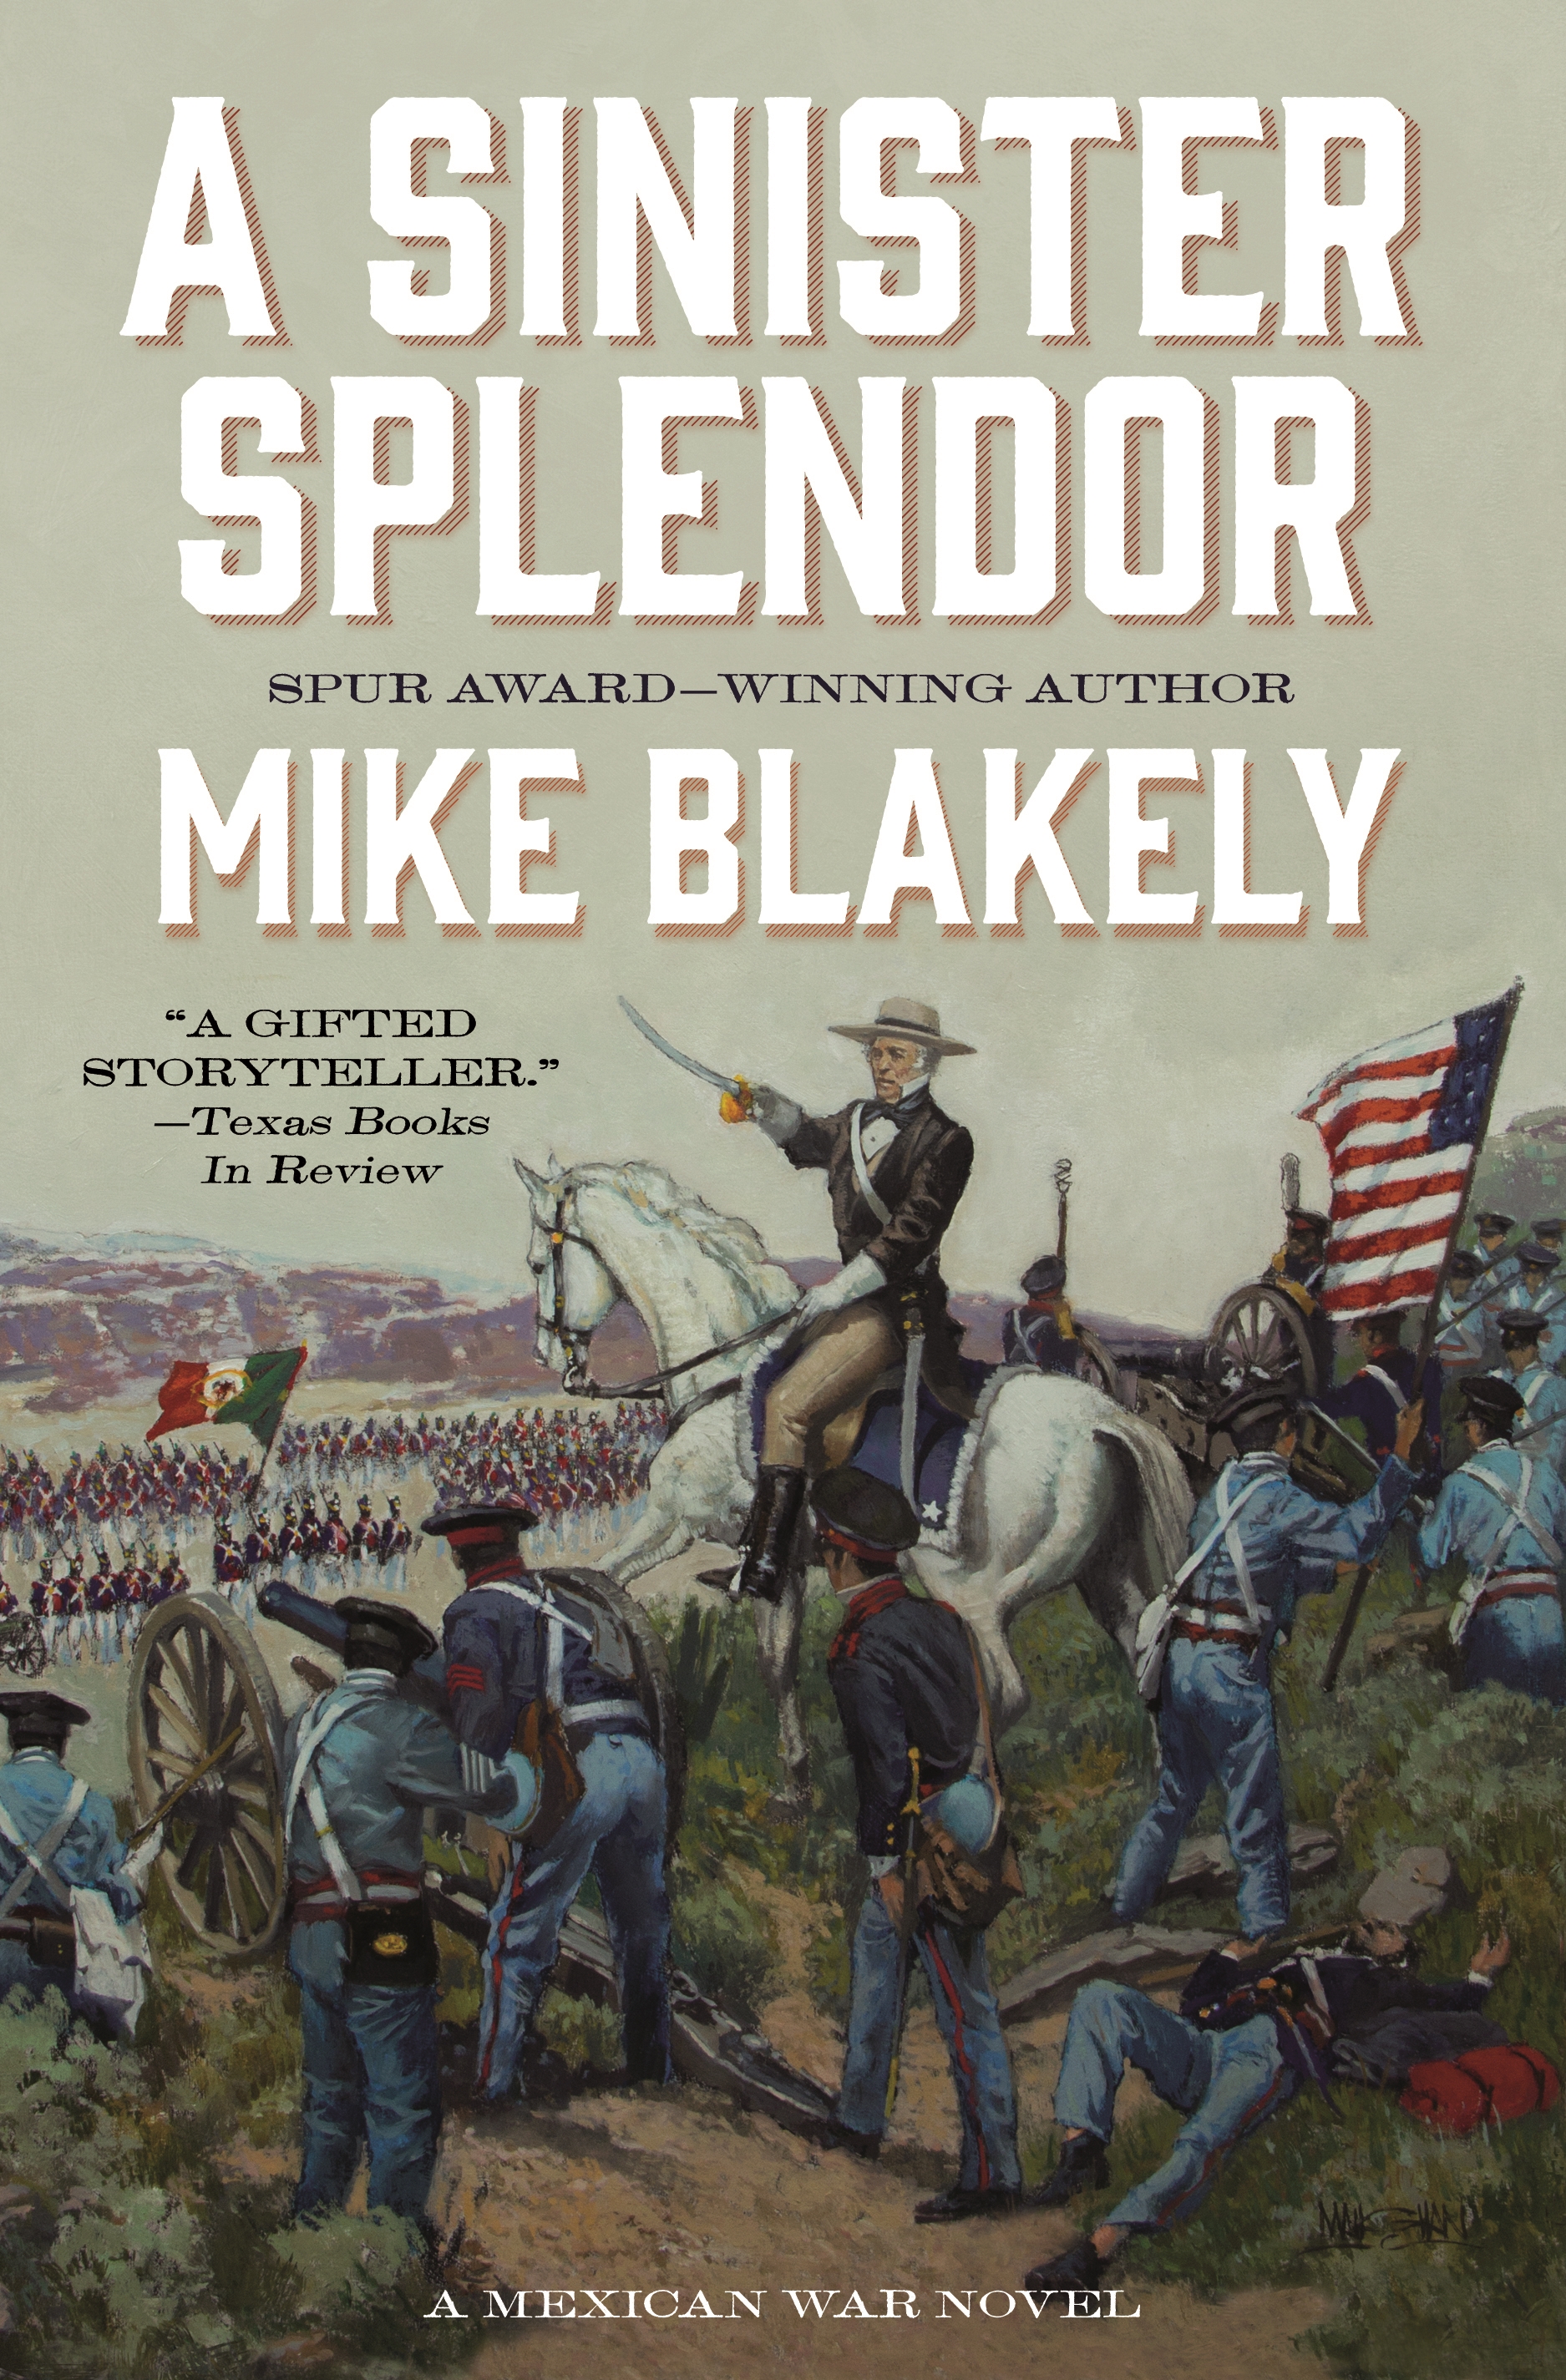 A Sinister Splendor : A Mexican War Novel by Mike Blakely